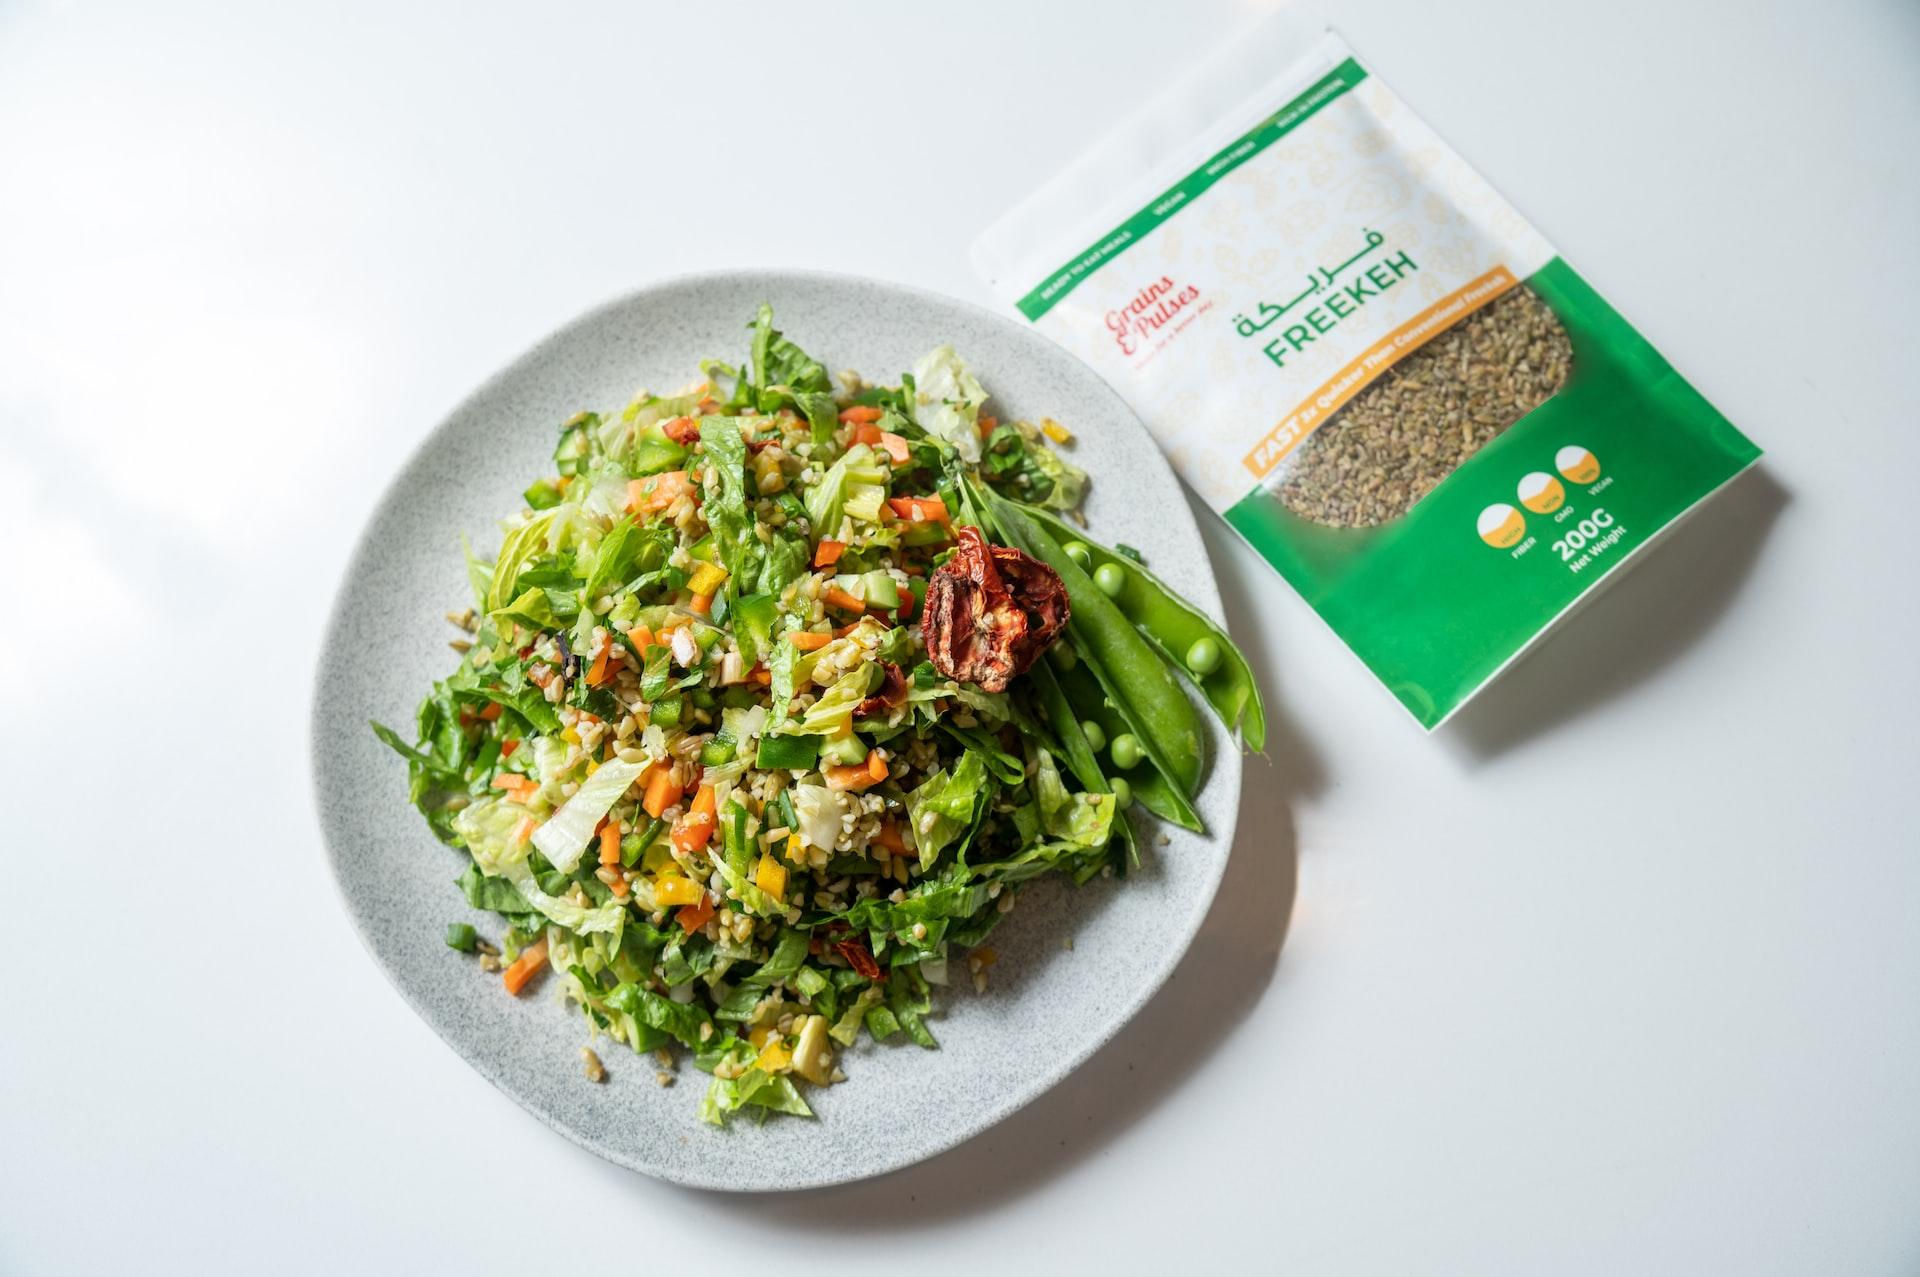 a white plate topped with a salad next to a bag of seeds